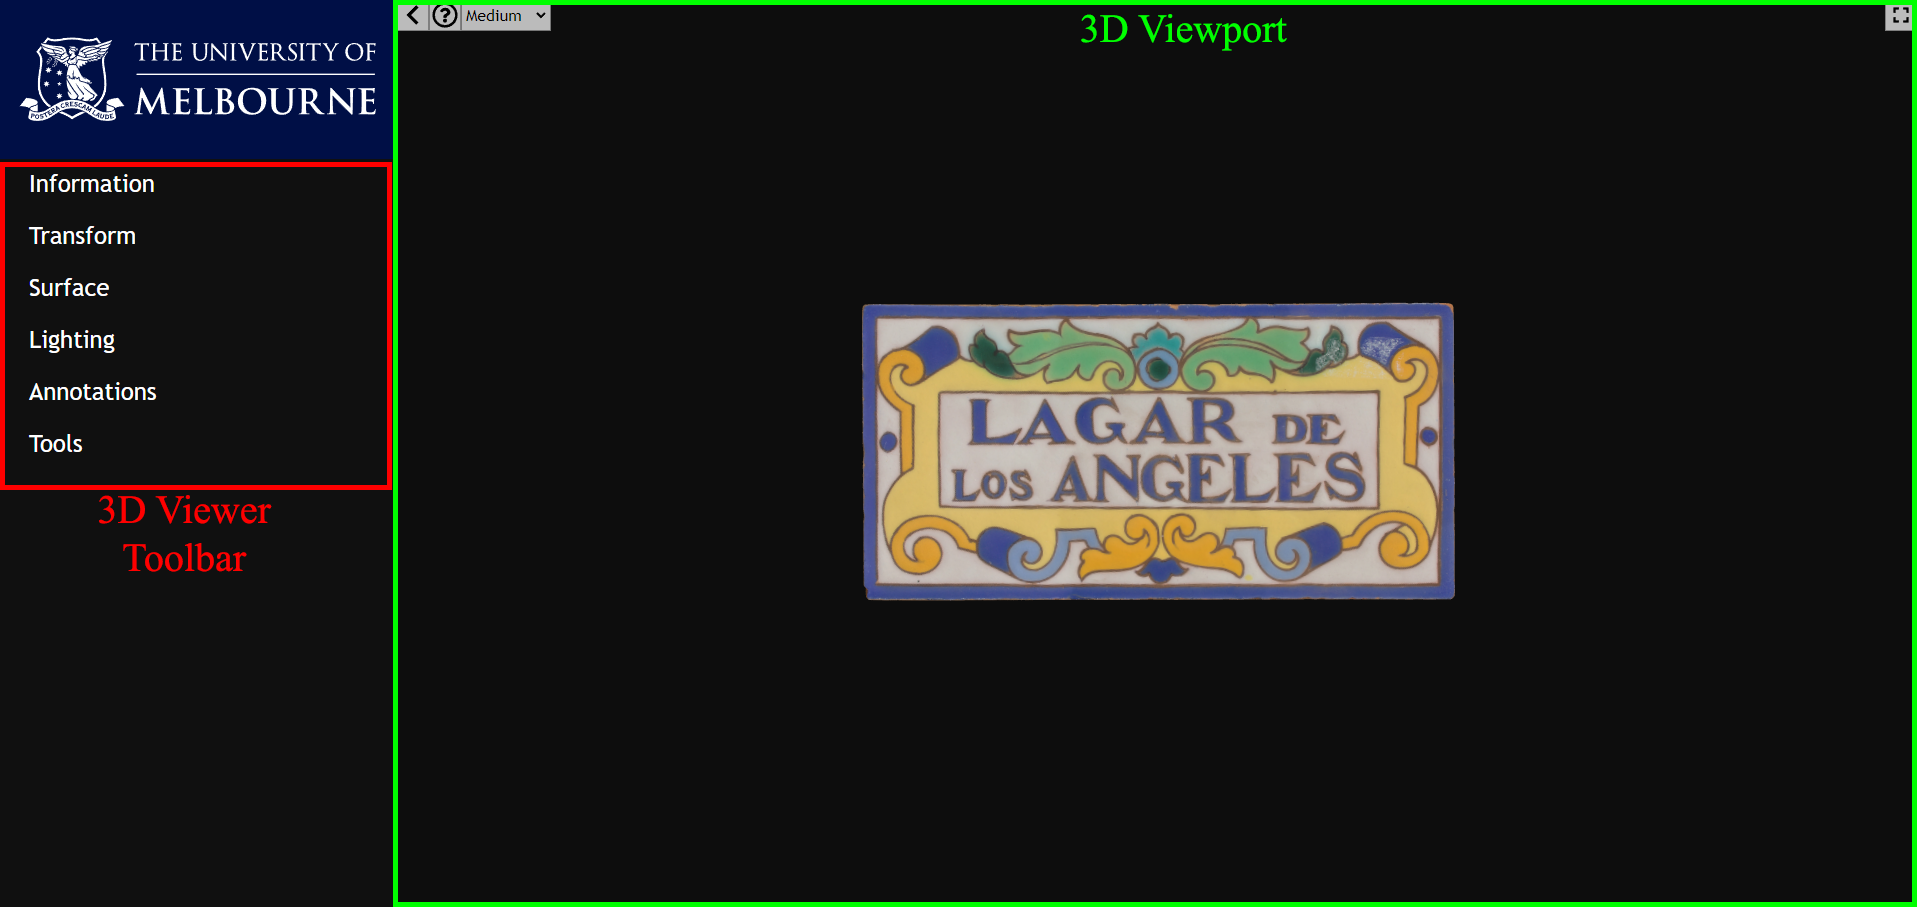 Position of 3D Viewer Toolbar and 3D Viewport indicated in Pedestal 3D interface